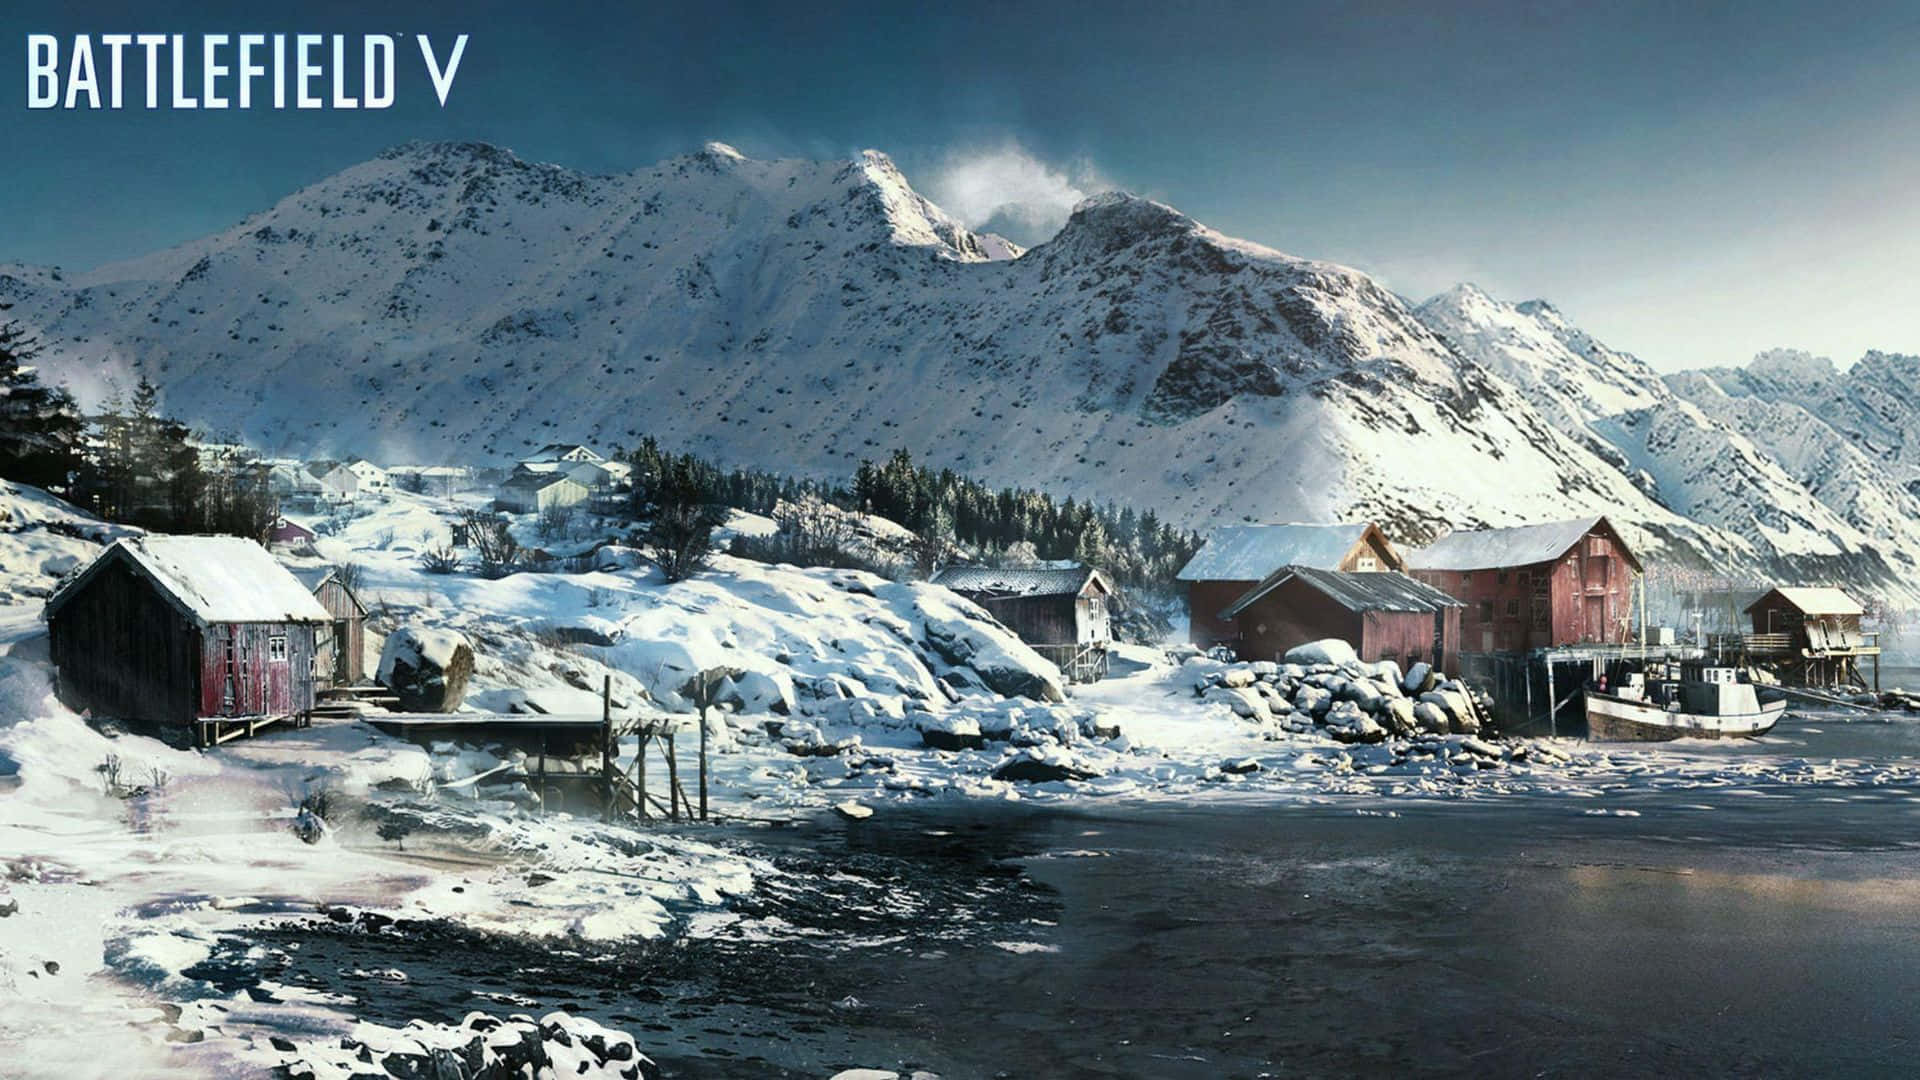 Experience the intensity of Battlefield V in ultra-high definition